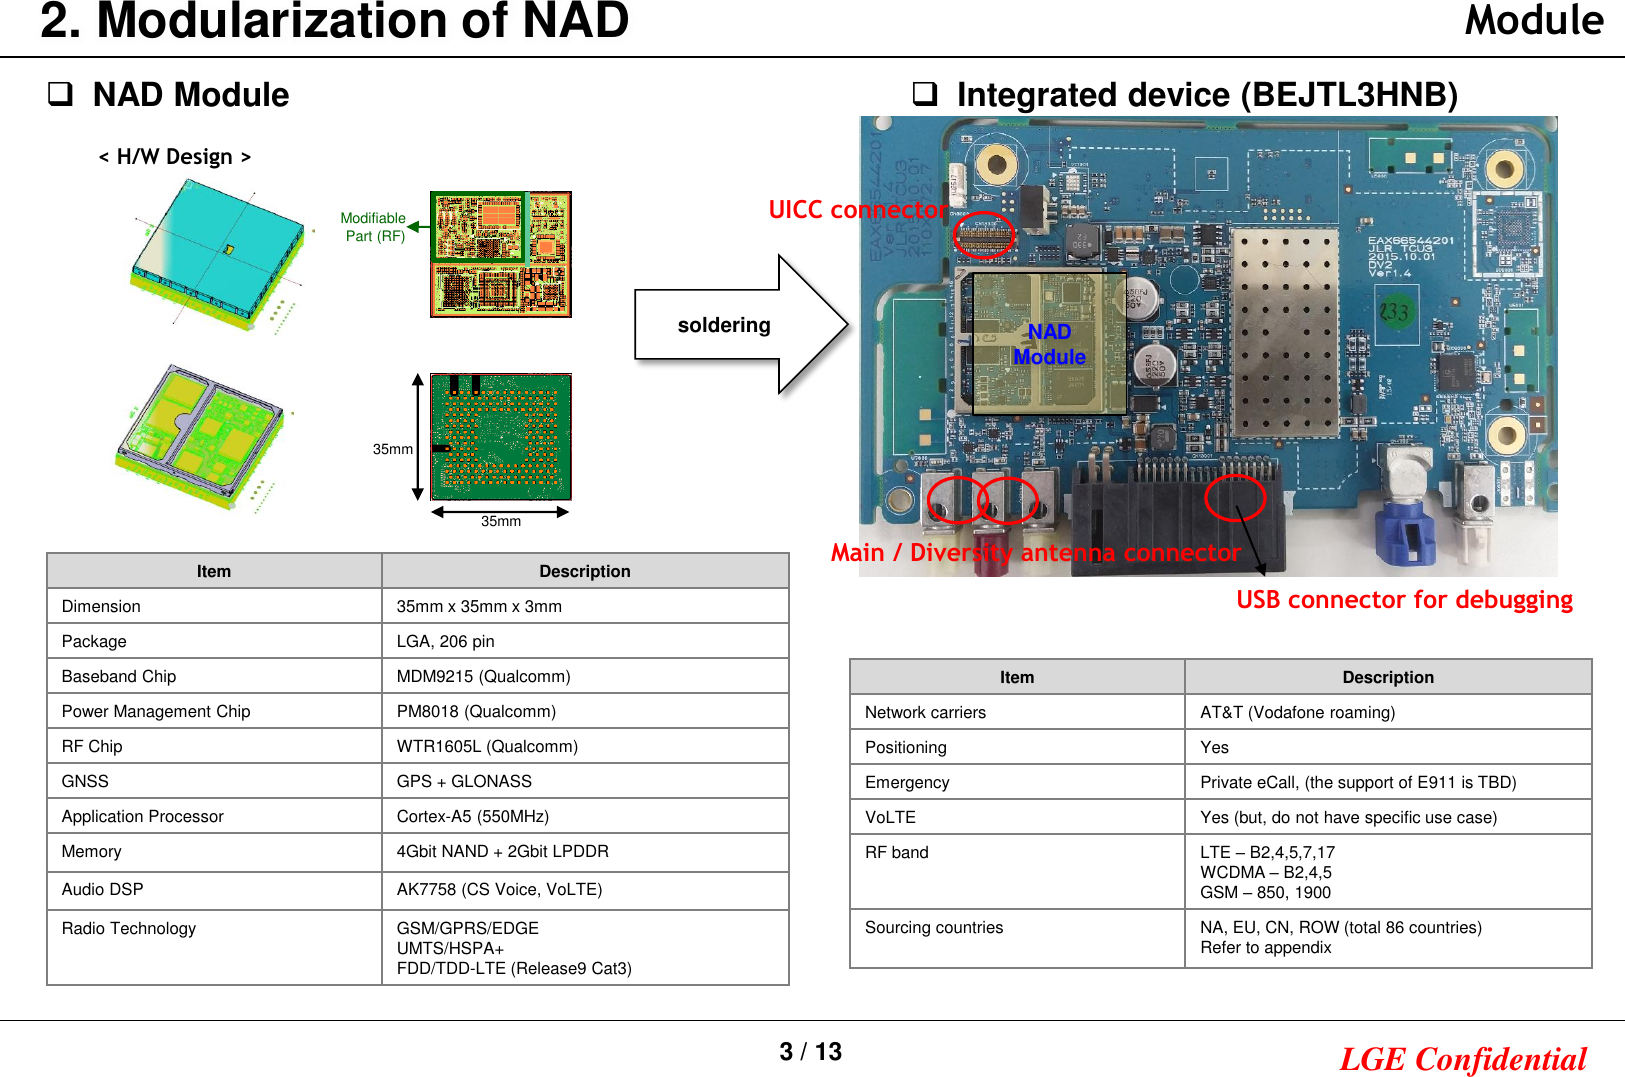 3 / 13 LGE ConfidentialNAD Module35mmModifiable Part (RF)&lt; H/W Design &gt;35mmItem DescriptionDimension 35mm x 35mm x 3mmPackage LGA, 206 pinBaseband Chip MDM9215 (Qualcomm)Power Management Chip PM8018 (Qualcomm)RF Chip WTR1605L (Qualcomm)GNSS GPS + GLONASSApplication Processor Cortex-A5 (550MHz)Memory  4Gbit NAND + 2Gbit LPDDRAudio DSP AK7758 (CS Voice, VoLTE)Radio Technology GSM/GPRS/EDGEUMTS/HSPA+FDD/TDD-LTE (Release9 Cat3)Integrated device (BEJTL3HNB)soldering NAD ModuleMain / Diversity antenna connectorUICC connectorUSB connector for debuggingItem DescriptionNetwork carriers AT&amp;T (Vodafone roaming)Positioning YesEmergency Private eCall, (the support of E911 is TBD)VoLTE Yes (but, do not have specific use case)RF band LTE –B2,4,5,7,17WCDMA –B2,4,5GSM –850, 1900Sourcing countries NA, EU, CN, ROW (total 86 countries)Refer to appendix2. Modularization of NAD Module